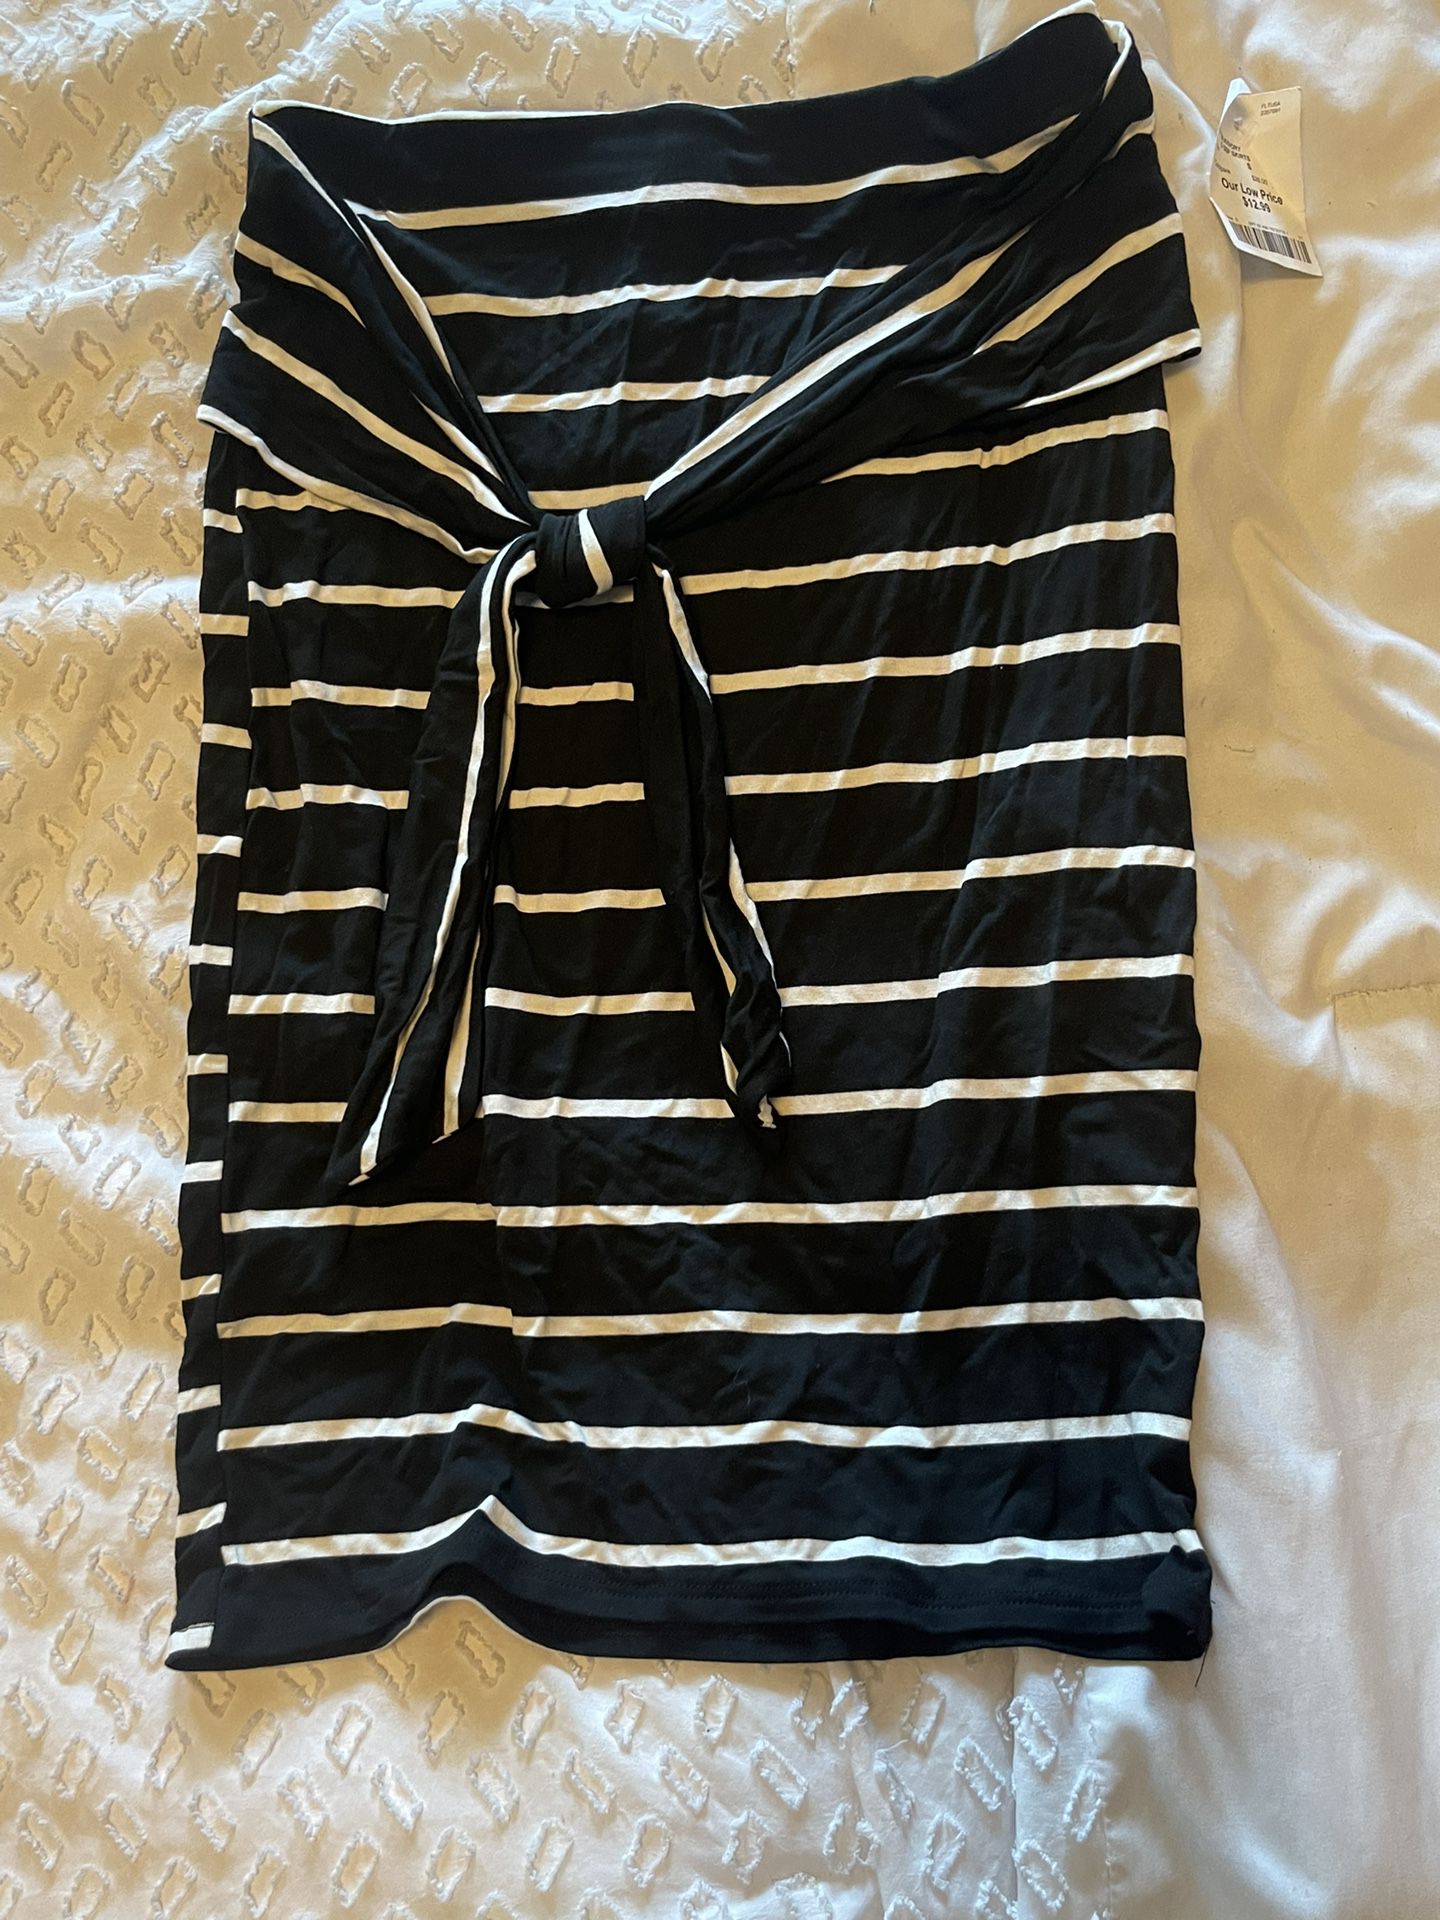 NWT Women’s Striped Skirt Size Small 